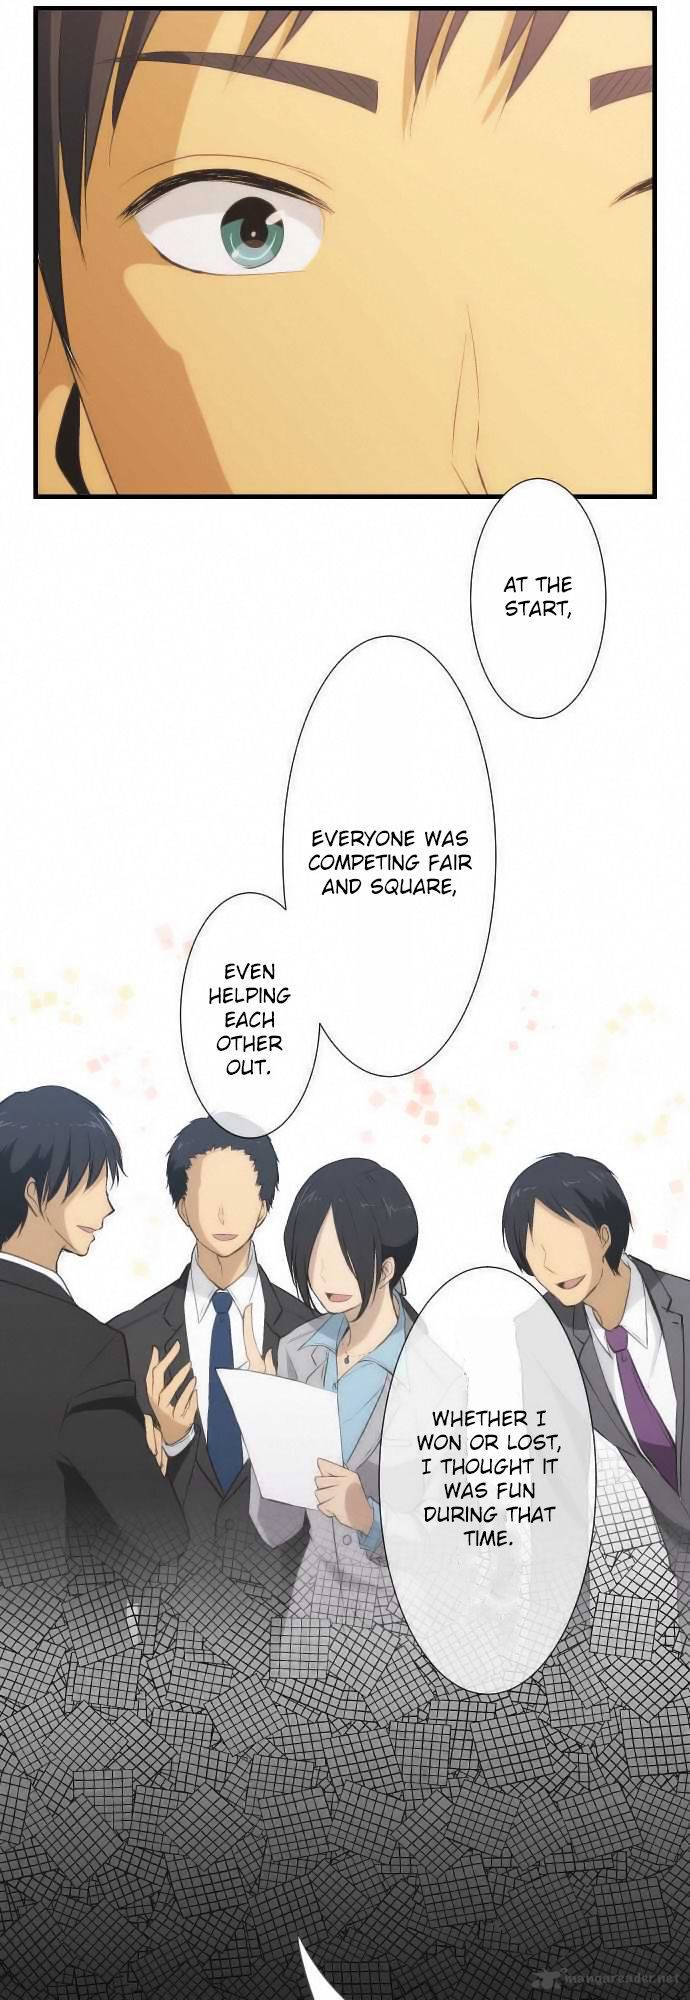 relife_38_18